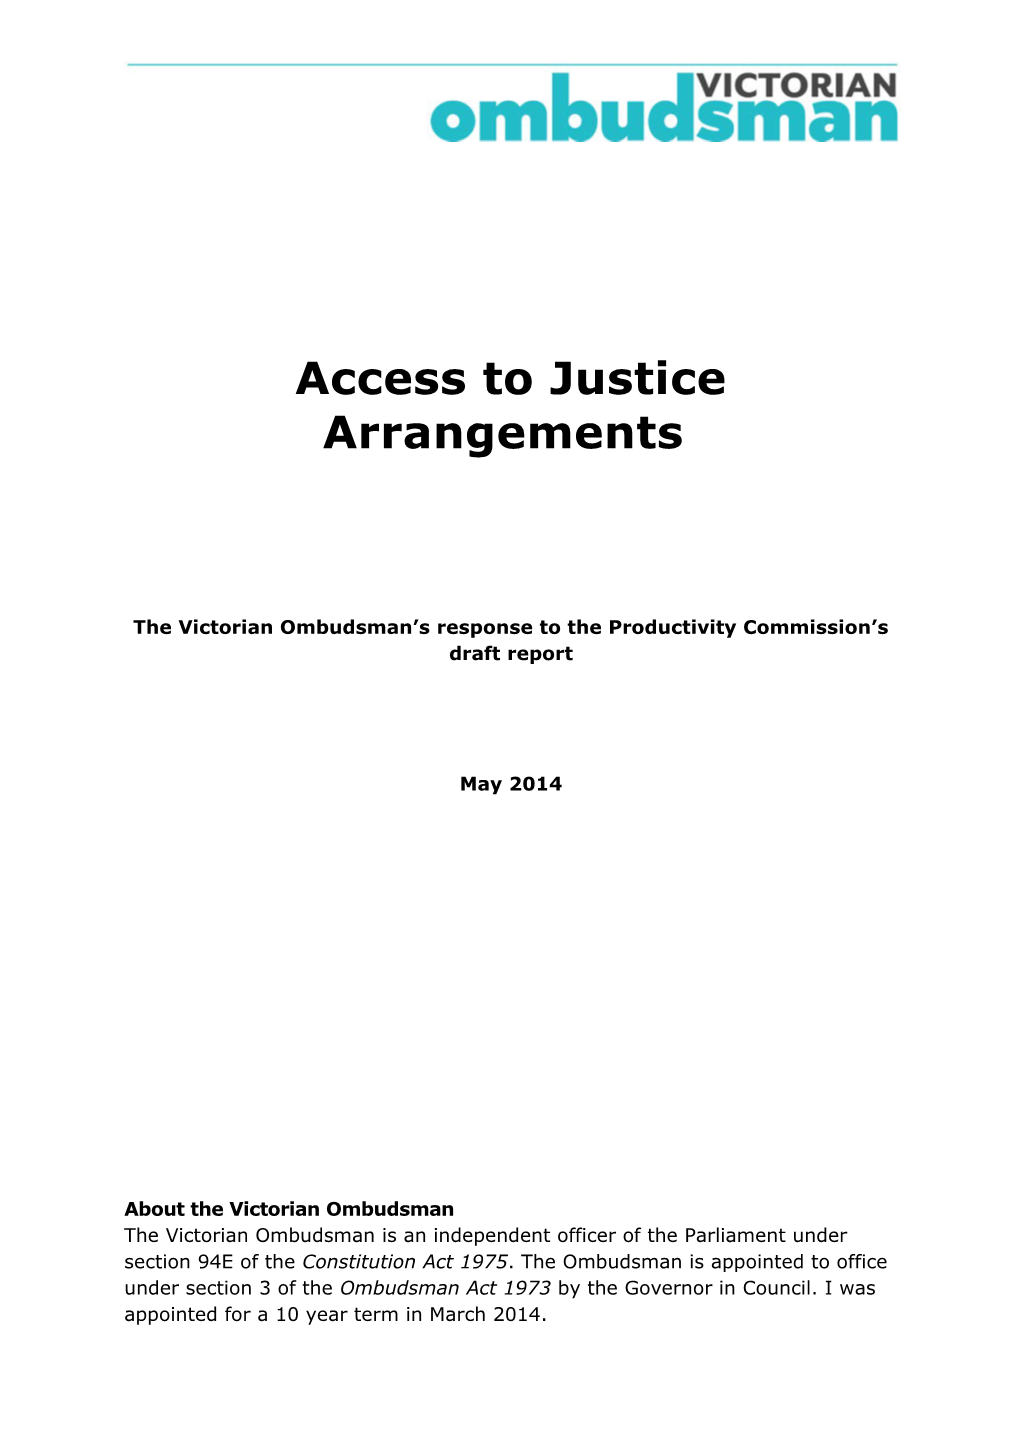 Submission DR176 - Victorian Ombudsman - Access to Justice Arrangements - Public Inquiry